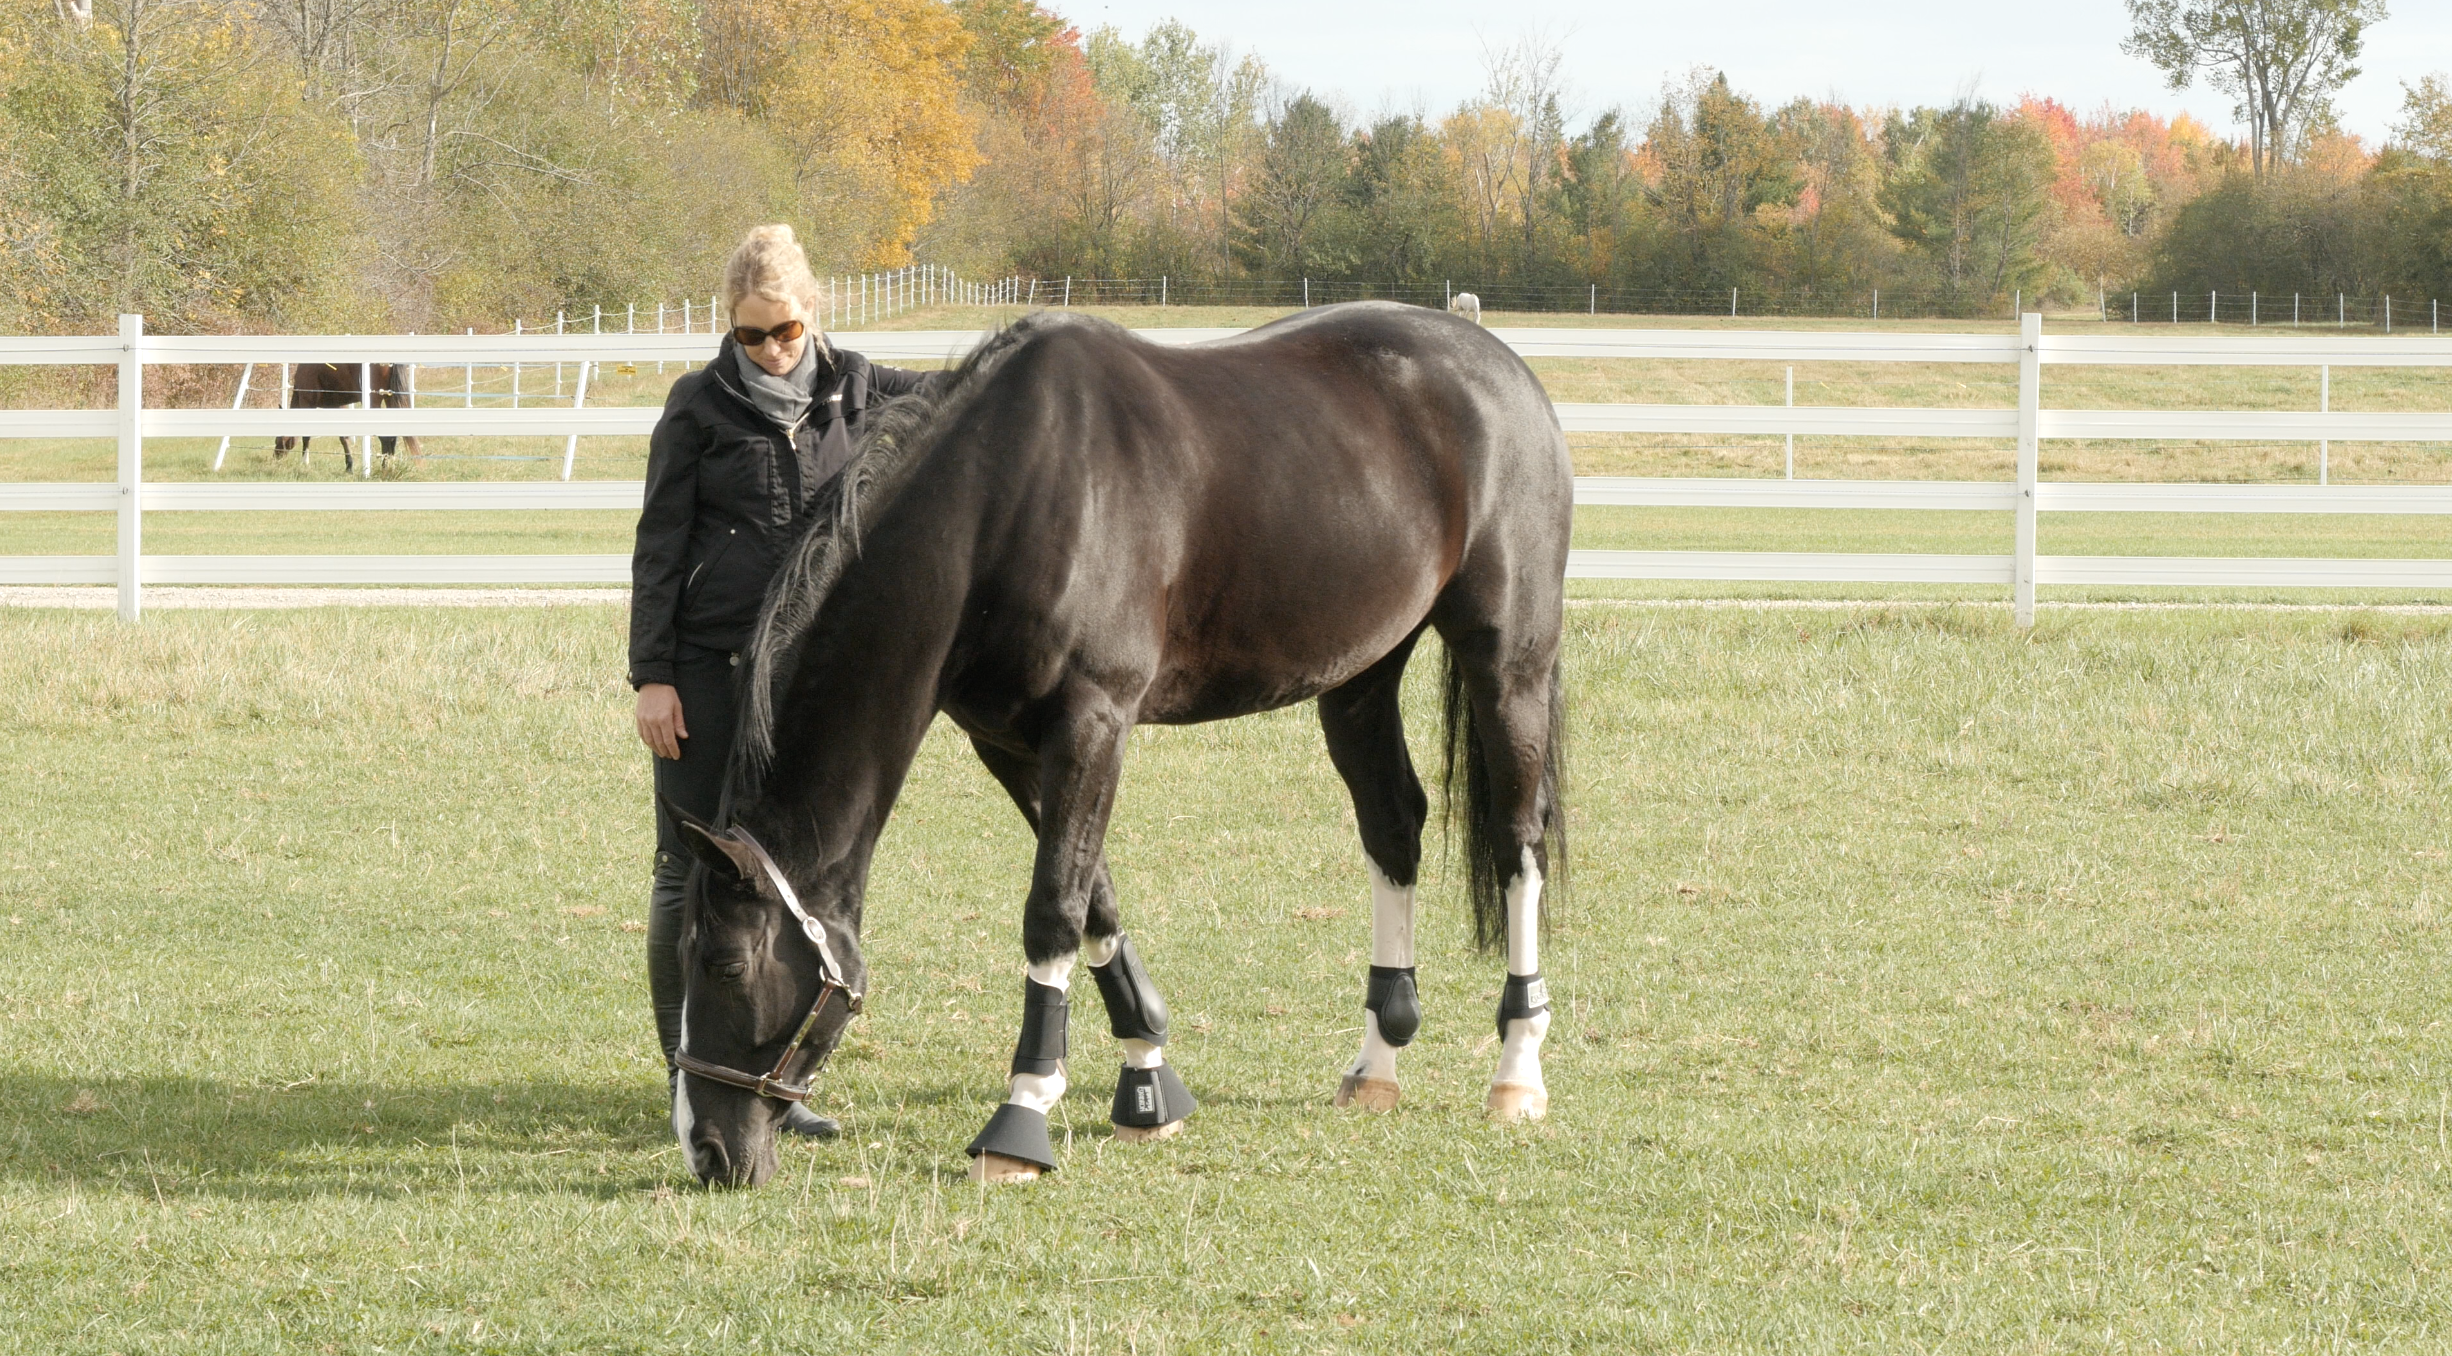 Amy Millar beginning a heart connection with her horse.